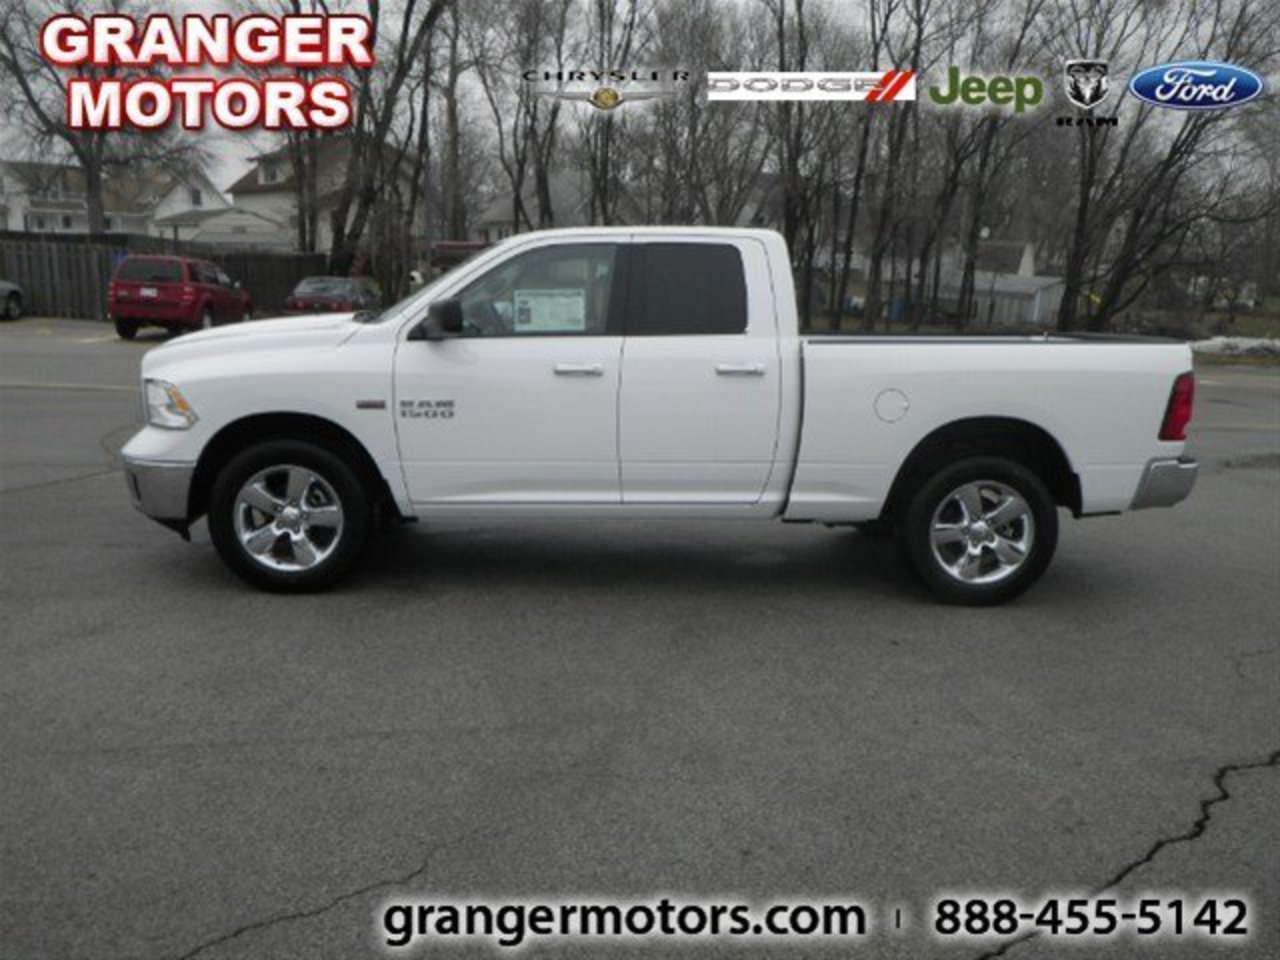 Stop into Granger Motors and check out this 2013 Dodge Ram SLT Quad Cab 4x4.